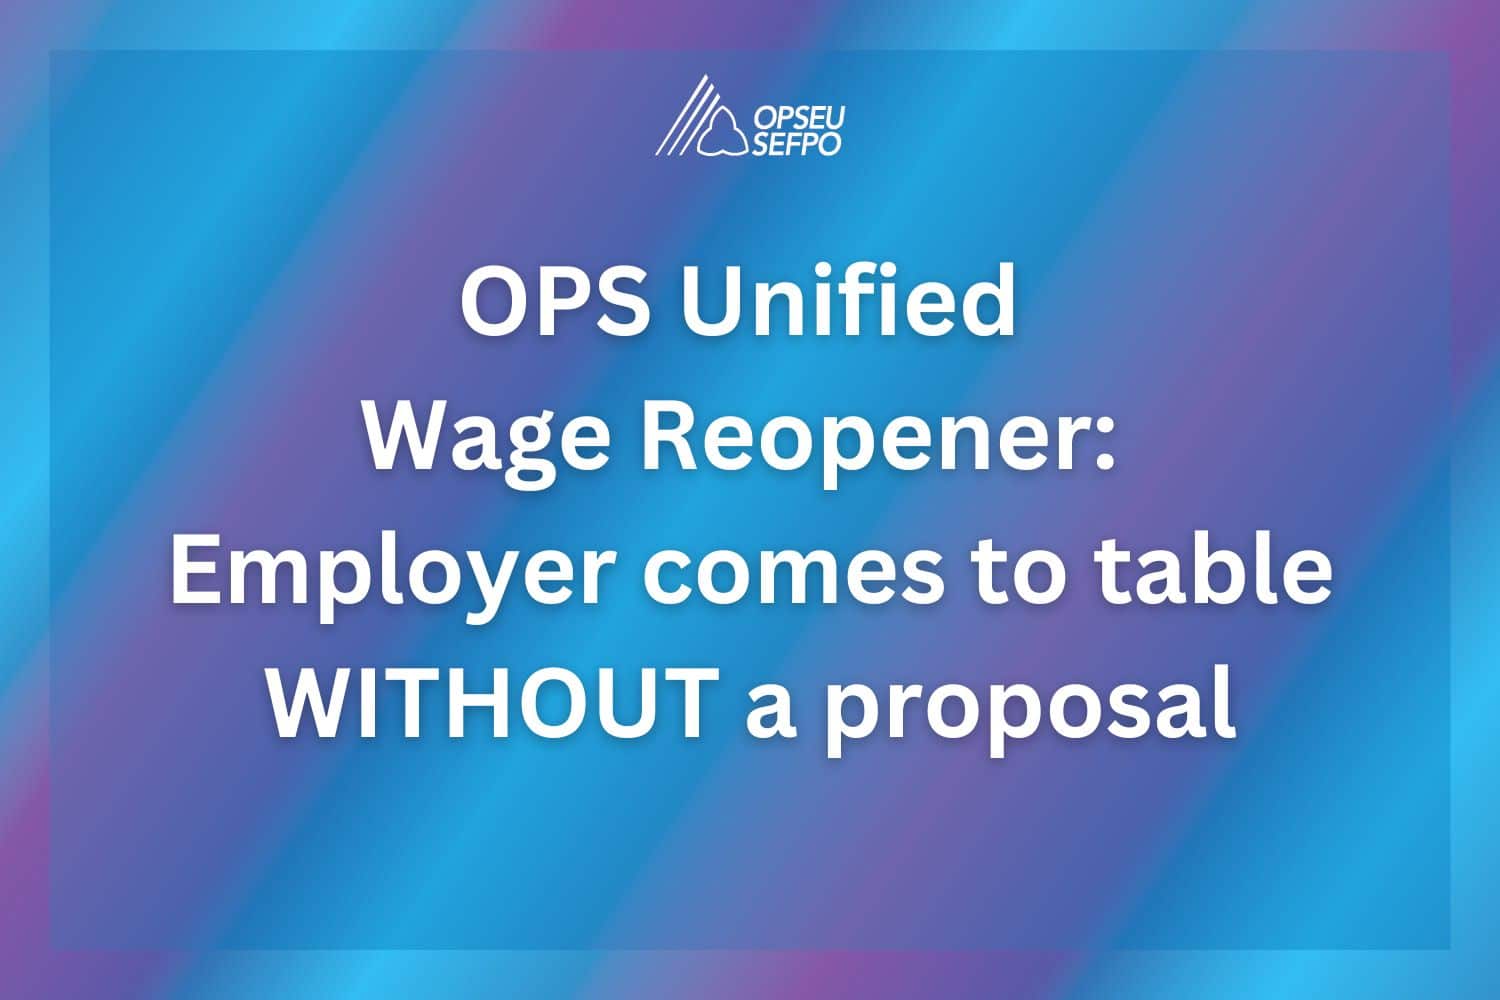 OPS Unified wage reopener: Employer comes to table without a proposal